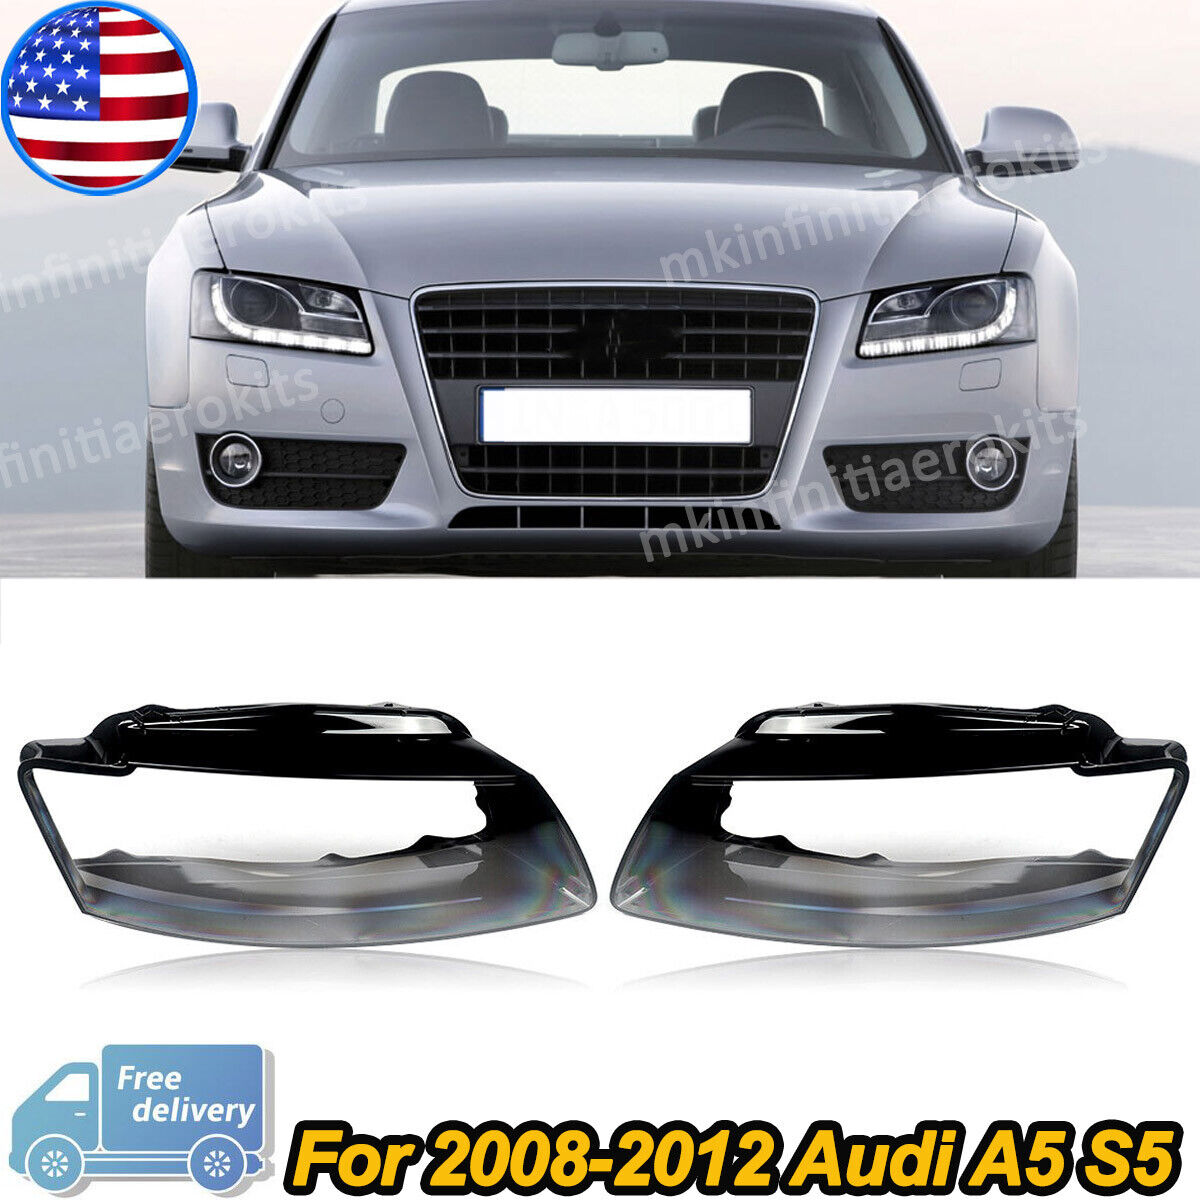 Fit For AUDI A5 2008-2011 Pair Headlight Cover Lens Shell 8T0941029 8T0941030 US